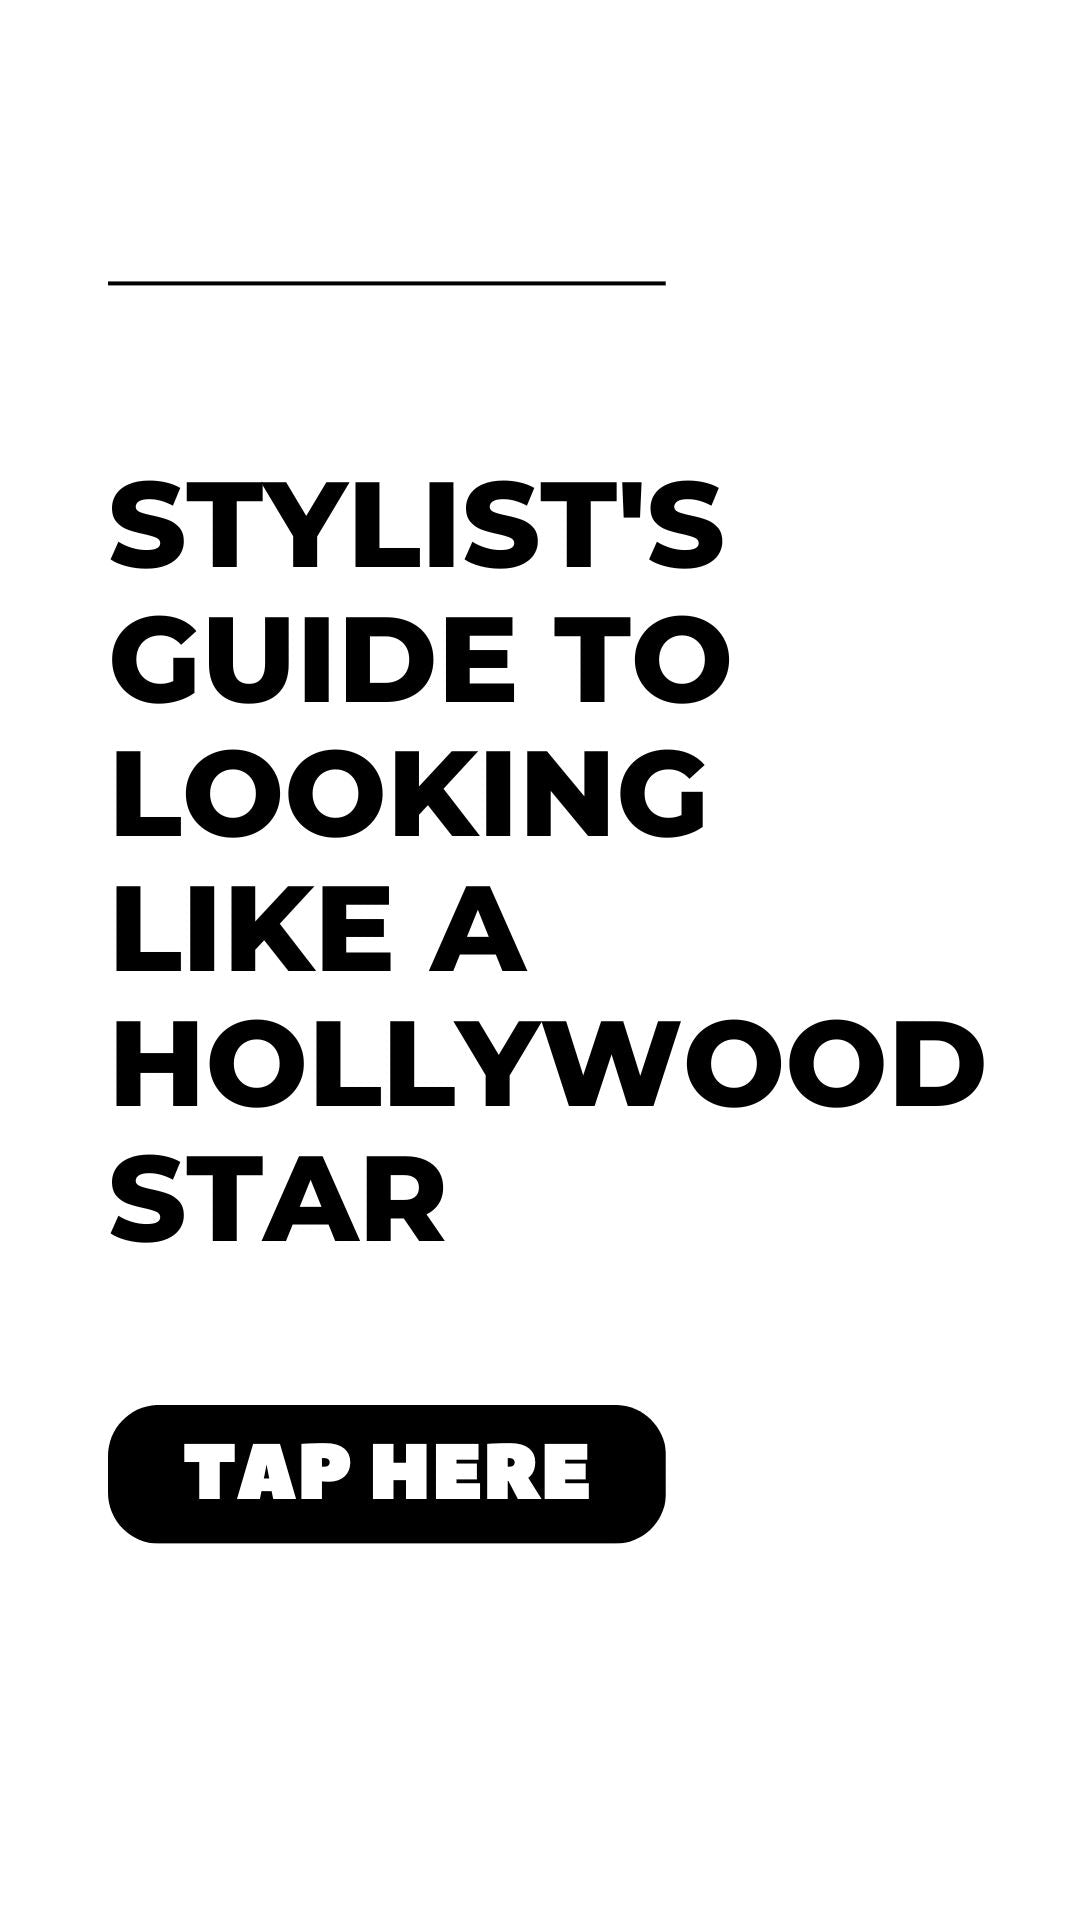 Stylist's Guide to Looking Like a Hollywood Star